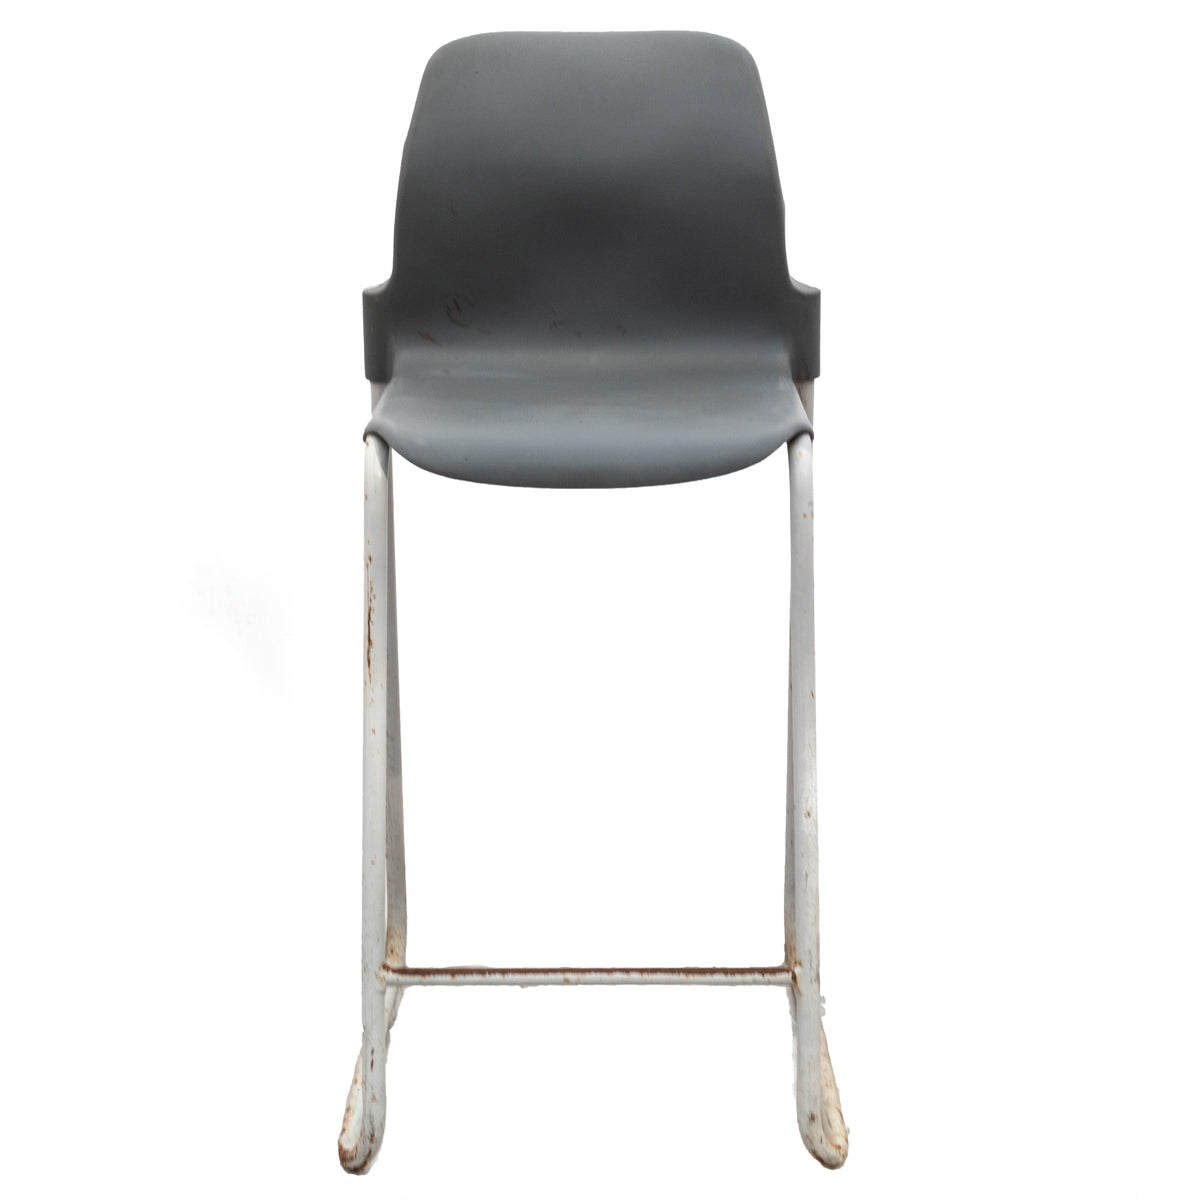 Set of 55 Mid-Century Style Stackable Stools | The Architectural Forum